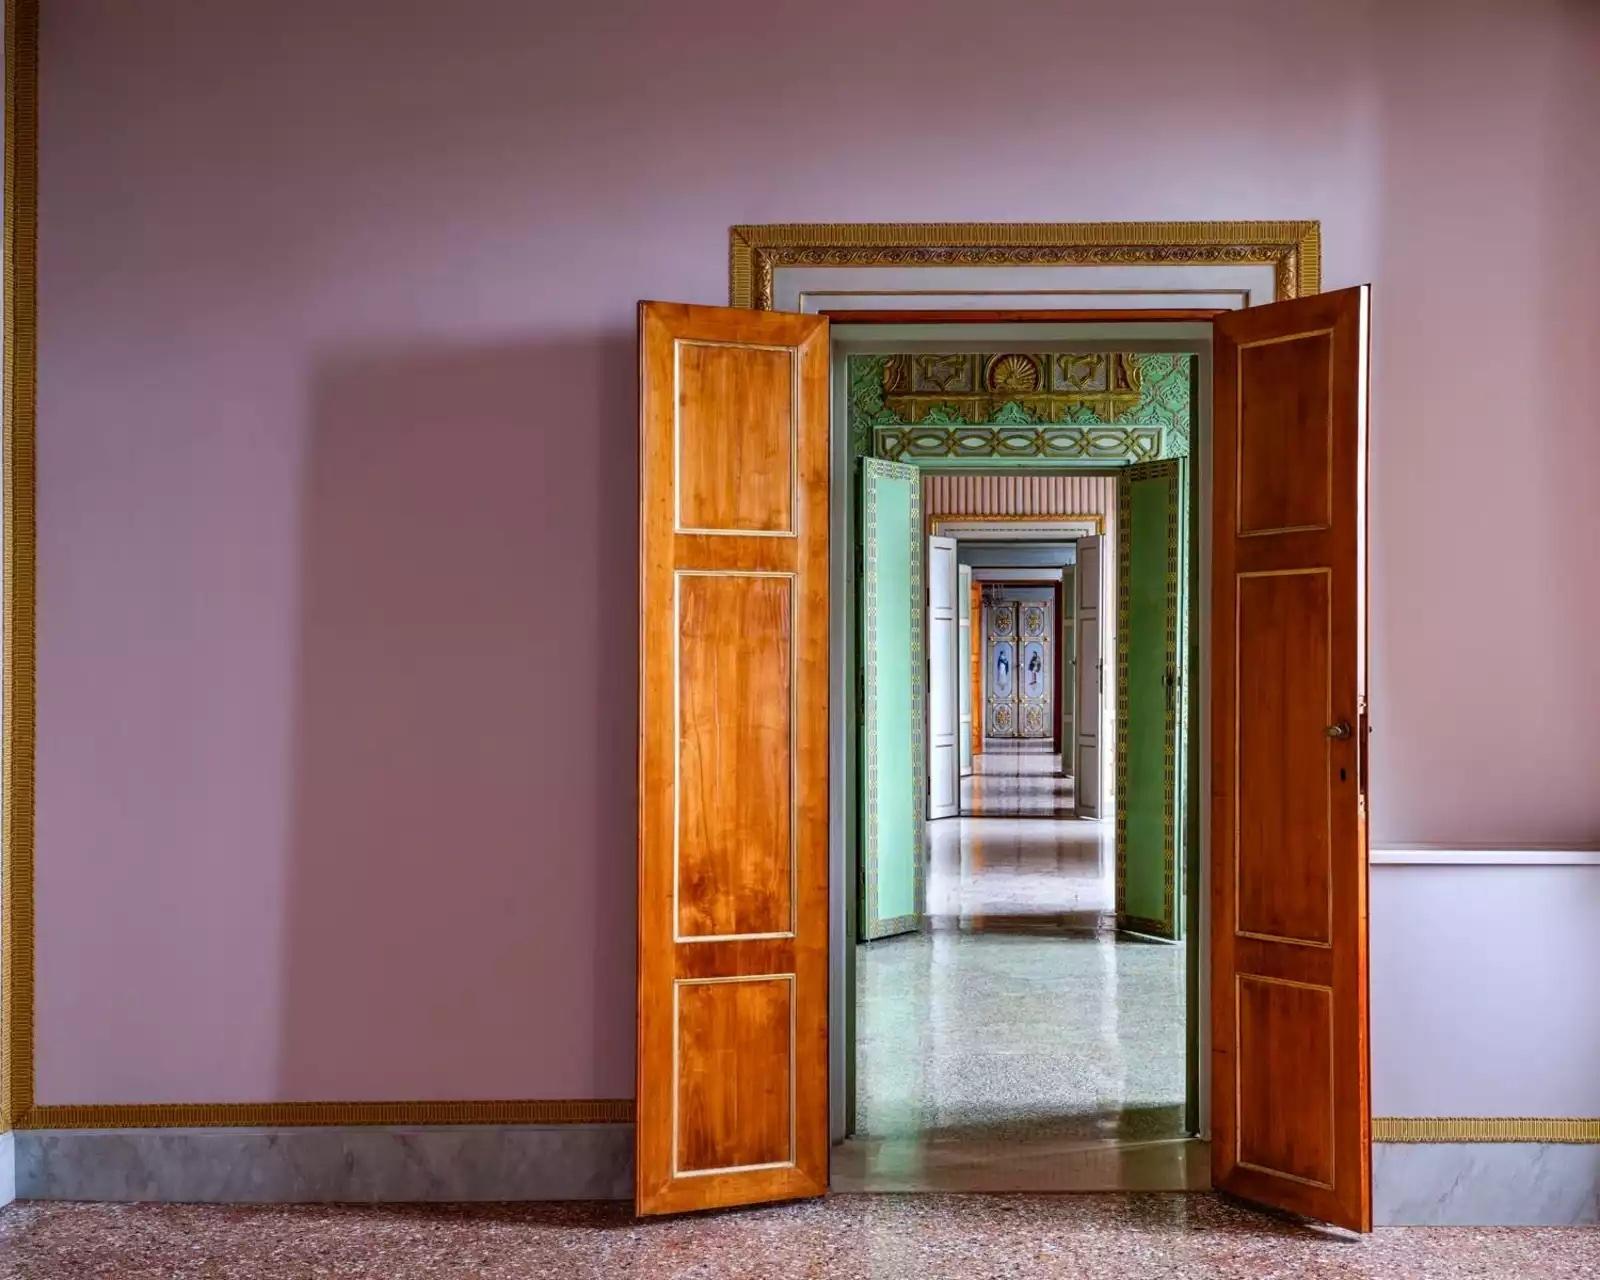 Palazzo Reale I, Venezia
2022
C print
39.5 x 47.5 inches - edition of 5
47.5 x 59 inches - edition of 5
71 x 88.5 inches - edition of 5

Massimo Listri is a Florence-based photographer whose work often presents interiors of great architectural and